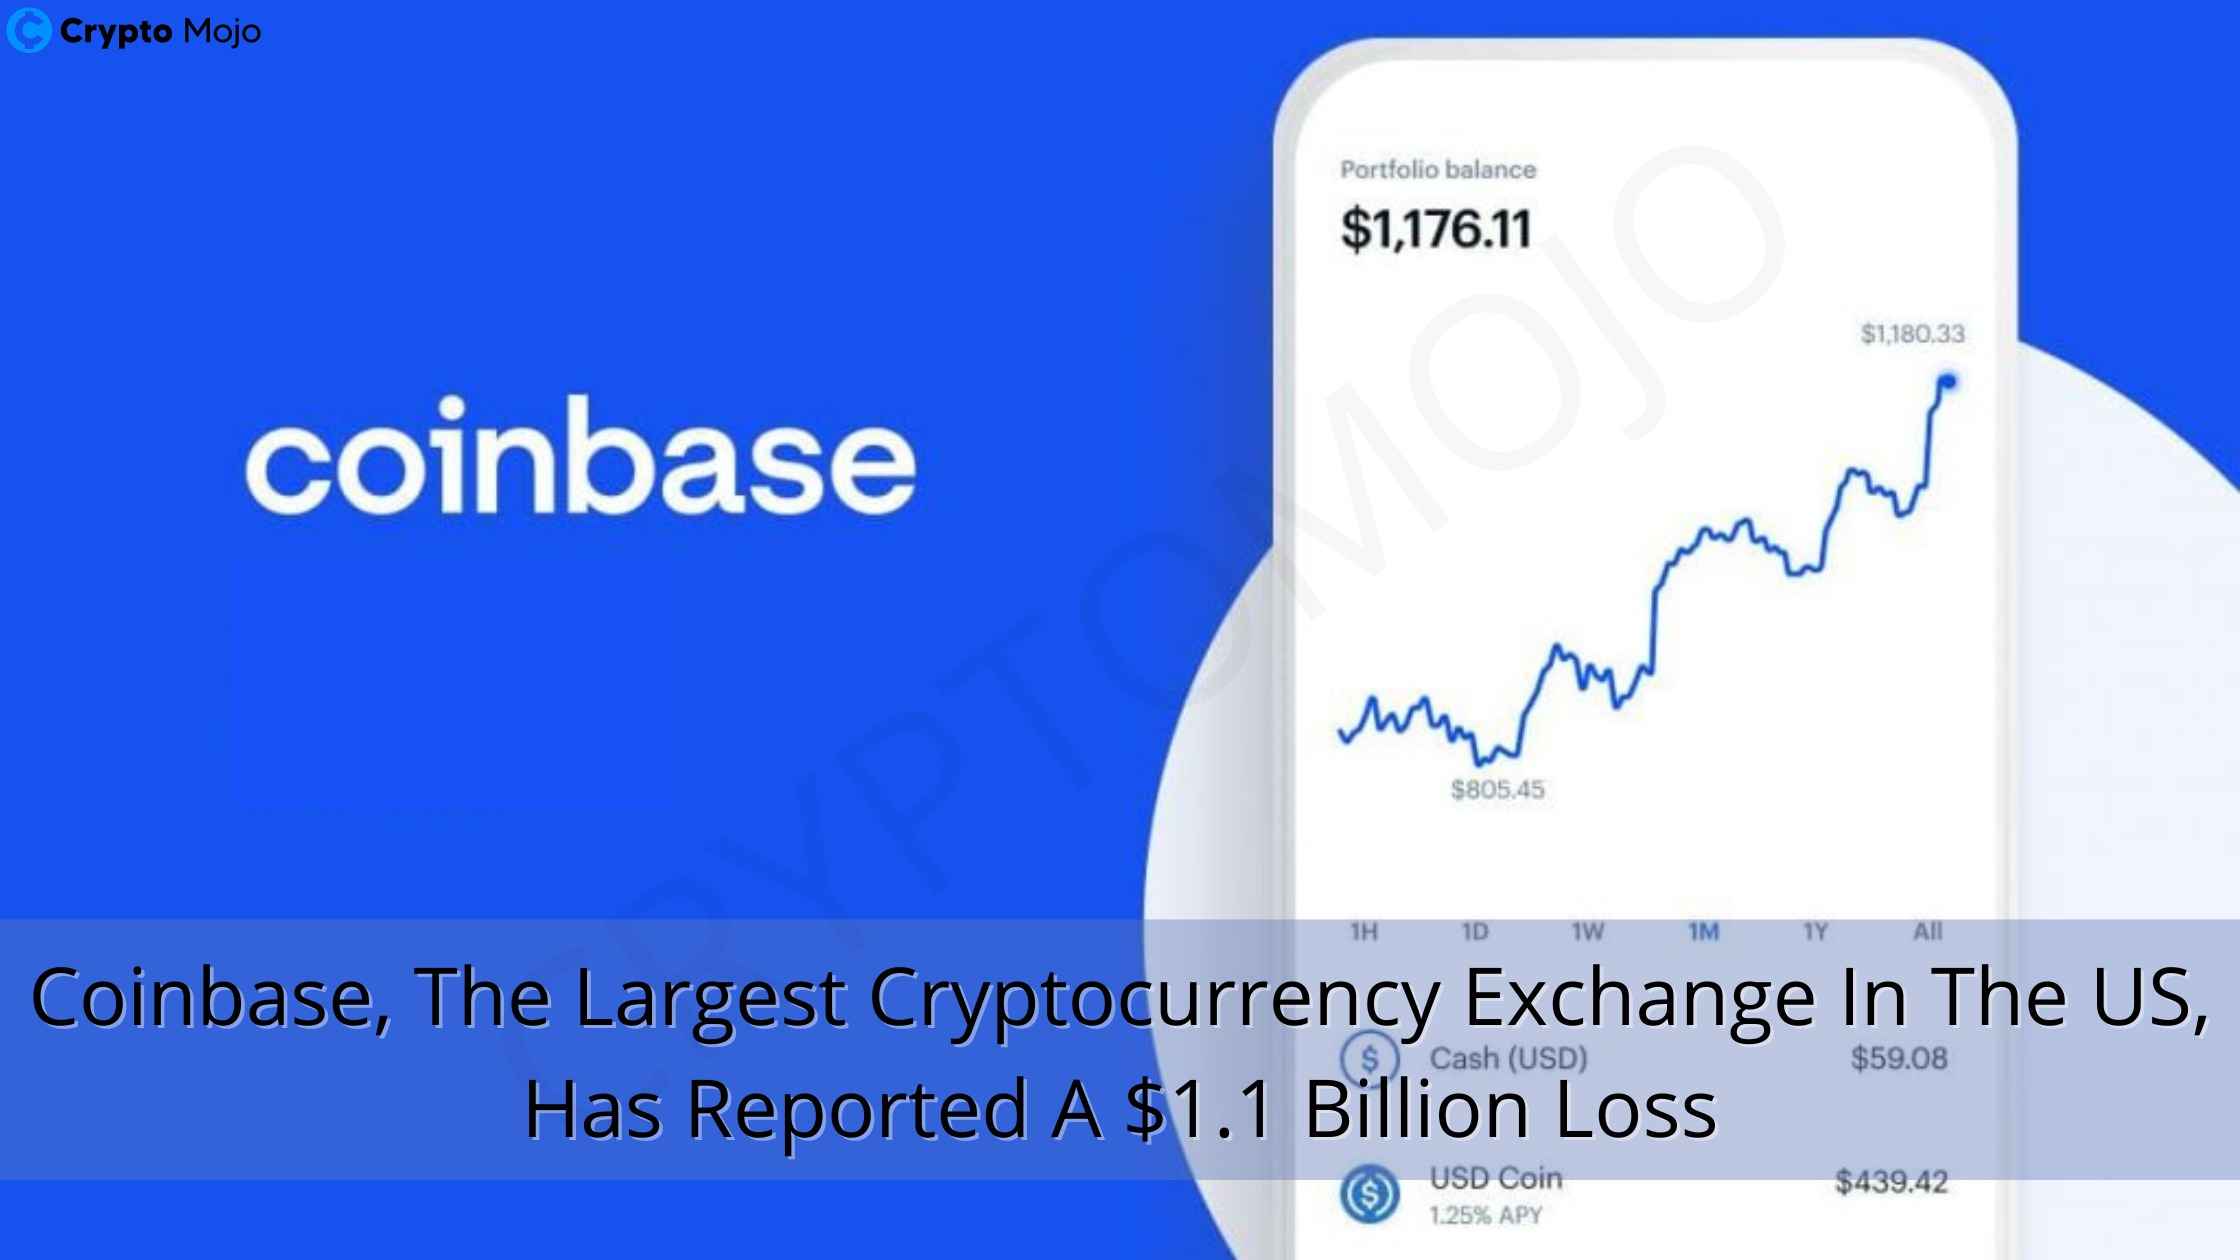 Coinbase, The Largest Cryptocurrency Exchange In The US, Has Reported A $1.1 Billion Loss